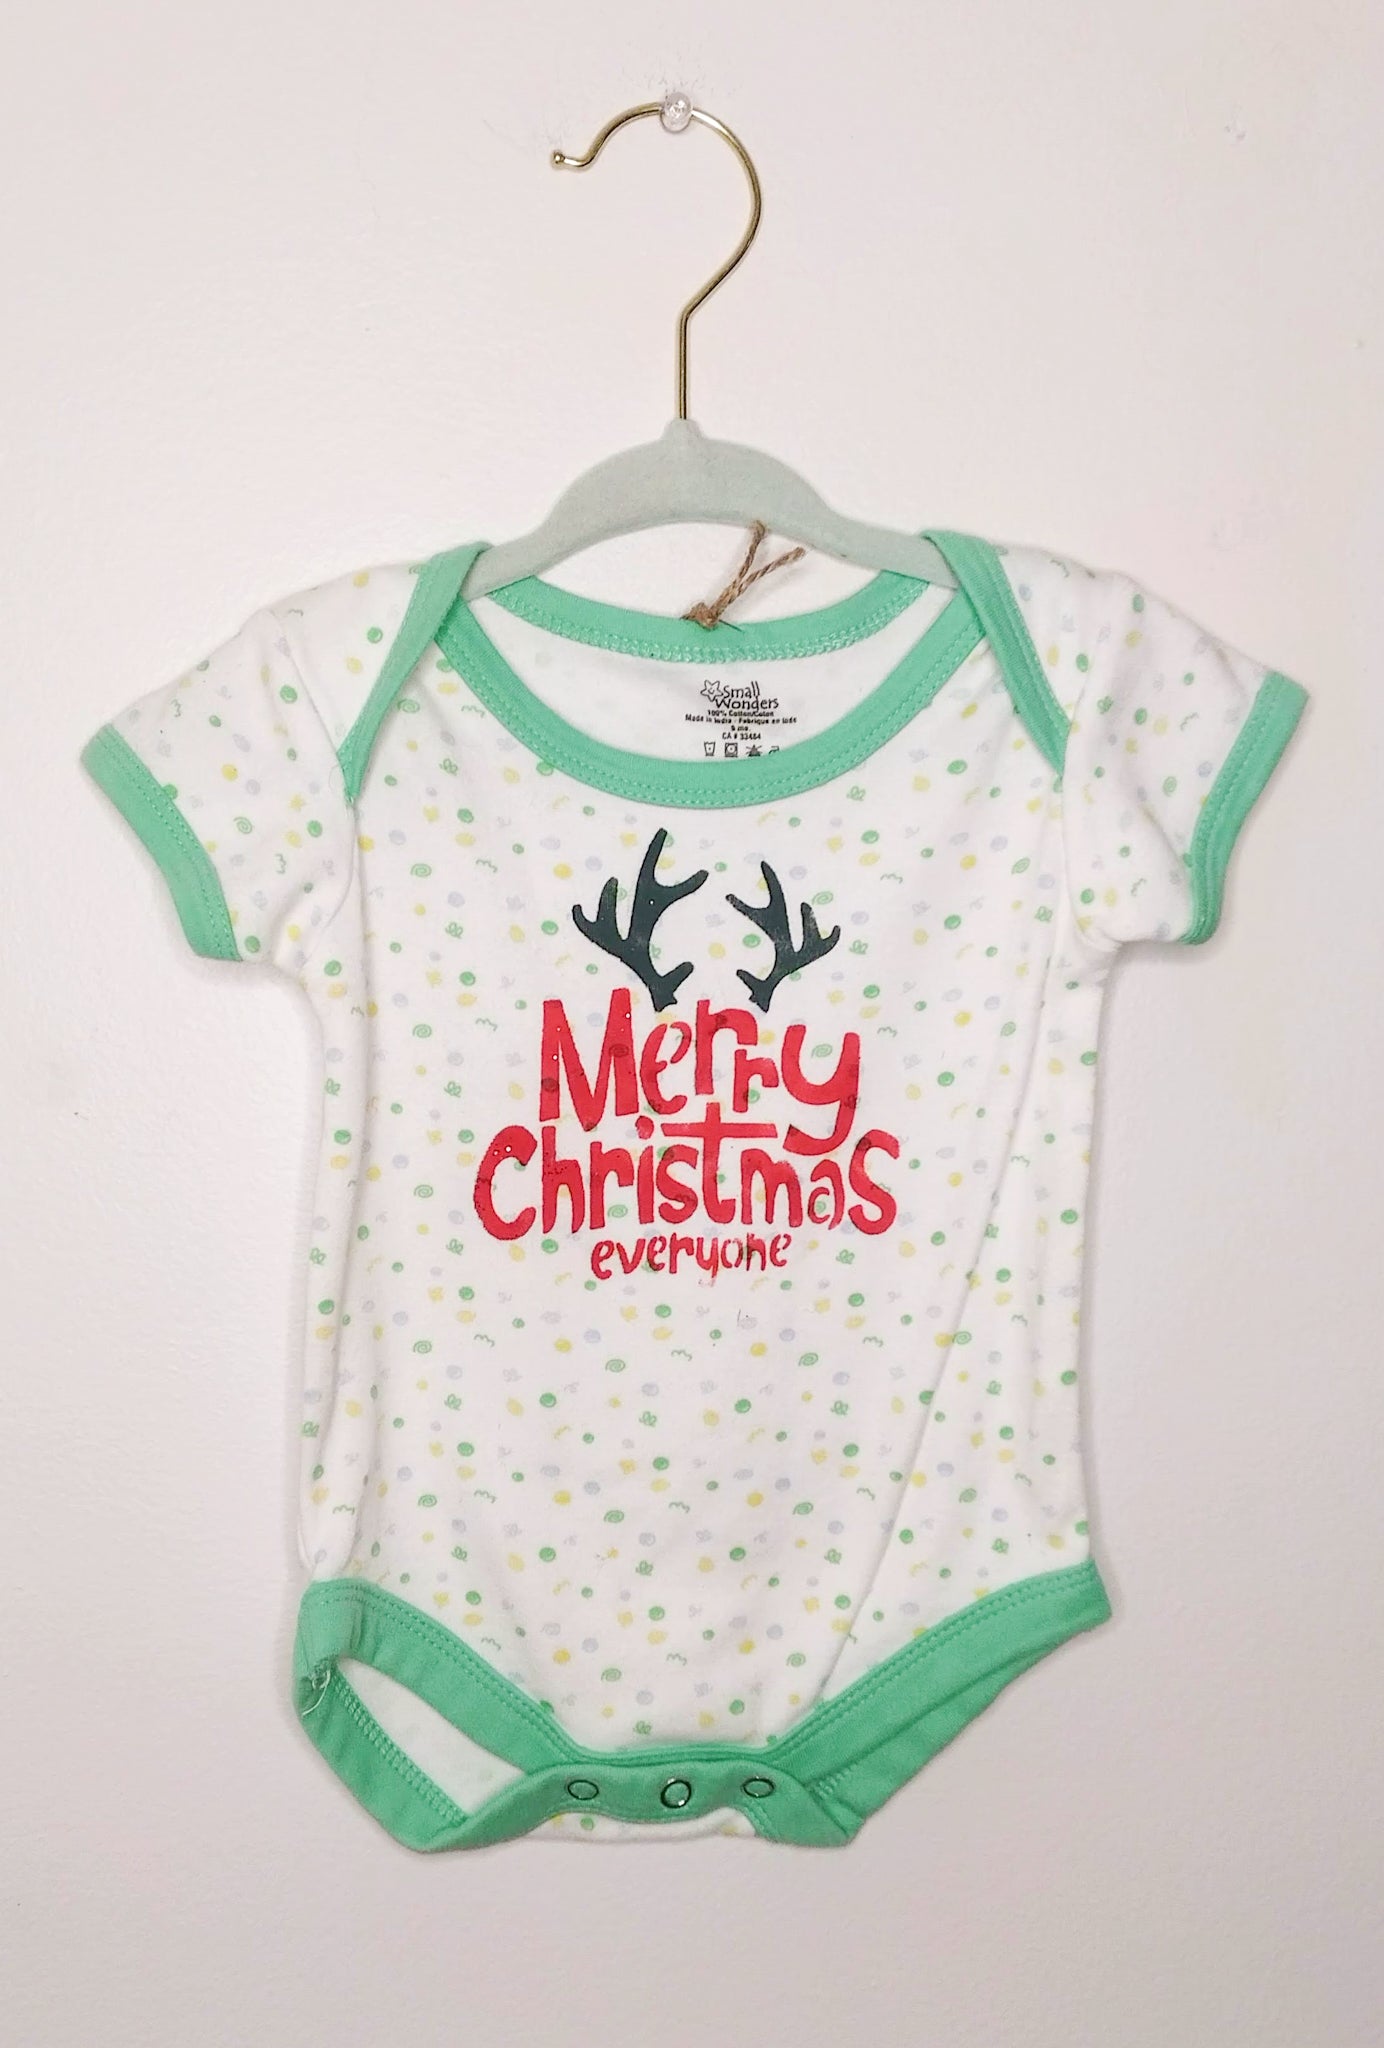 Green Squiggles Merry Christmas Upcycled Bodysuit by Eco Pretty - 9 Months